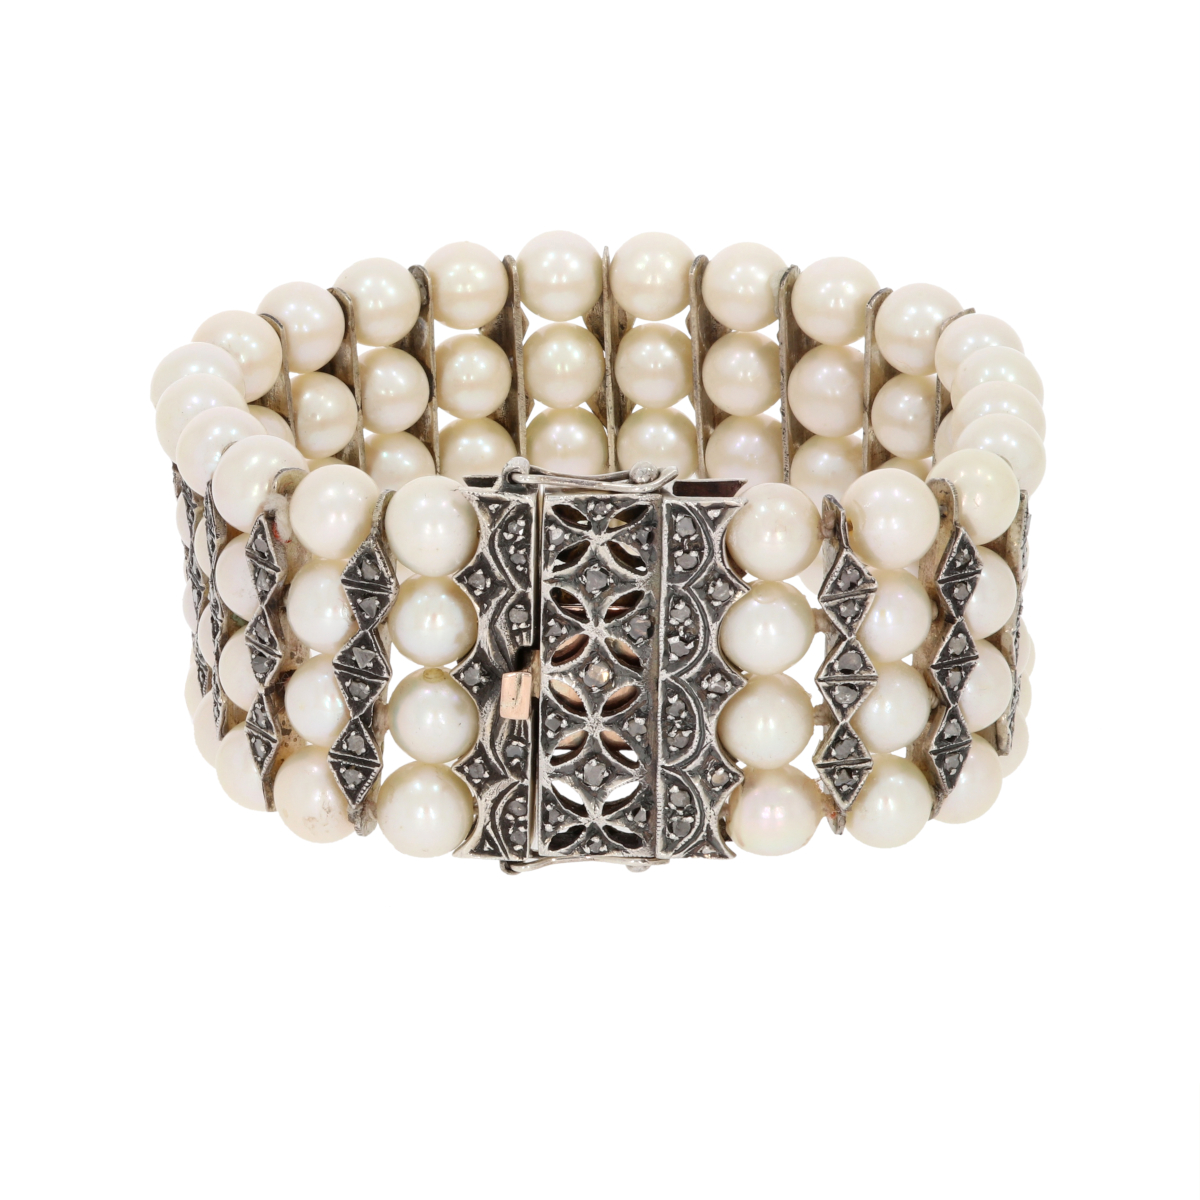 Bracelet with pearls and diamonds